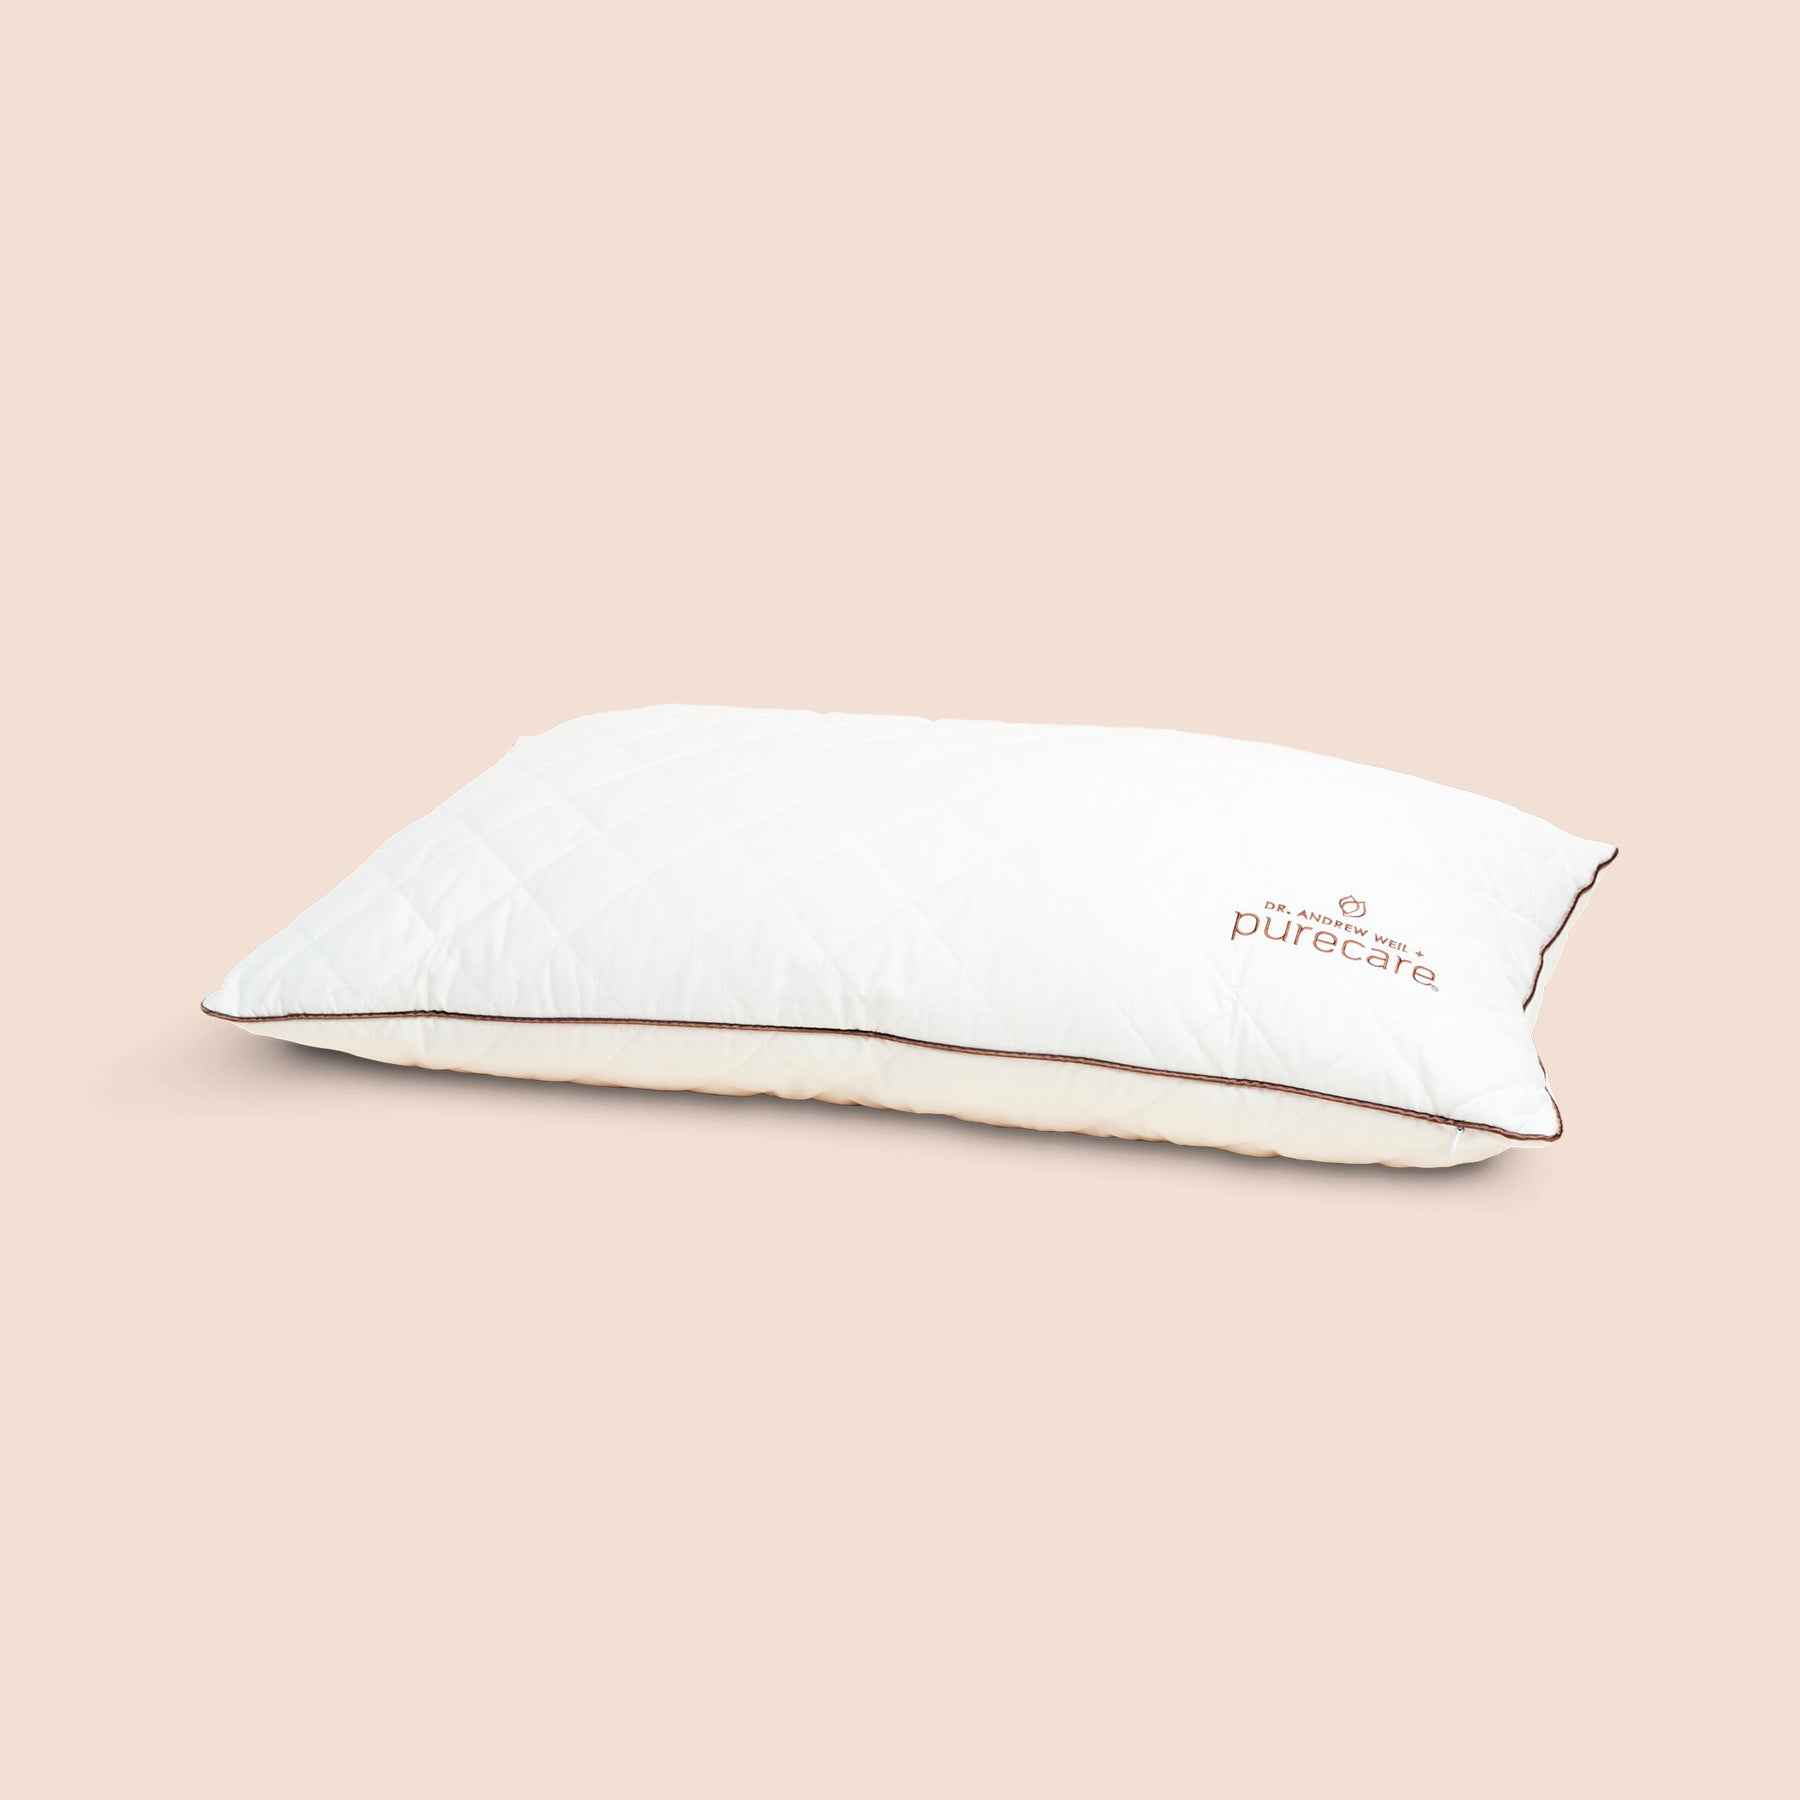 Image of All Seasons Wool Pillow on light pink background with Dr. Andrew Weil + Purecare logo in bottom right corner of pillow